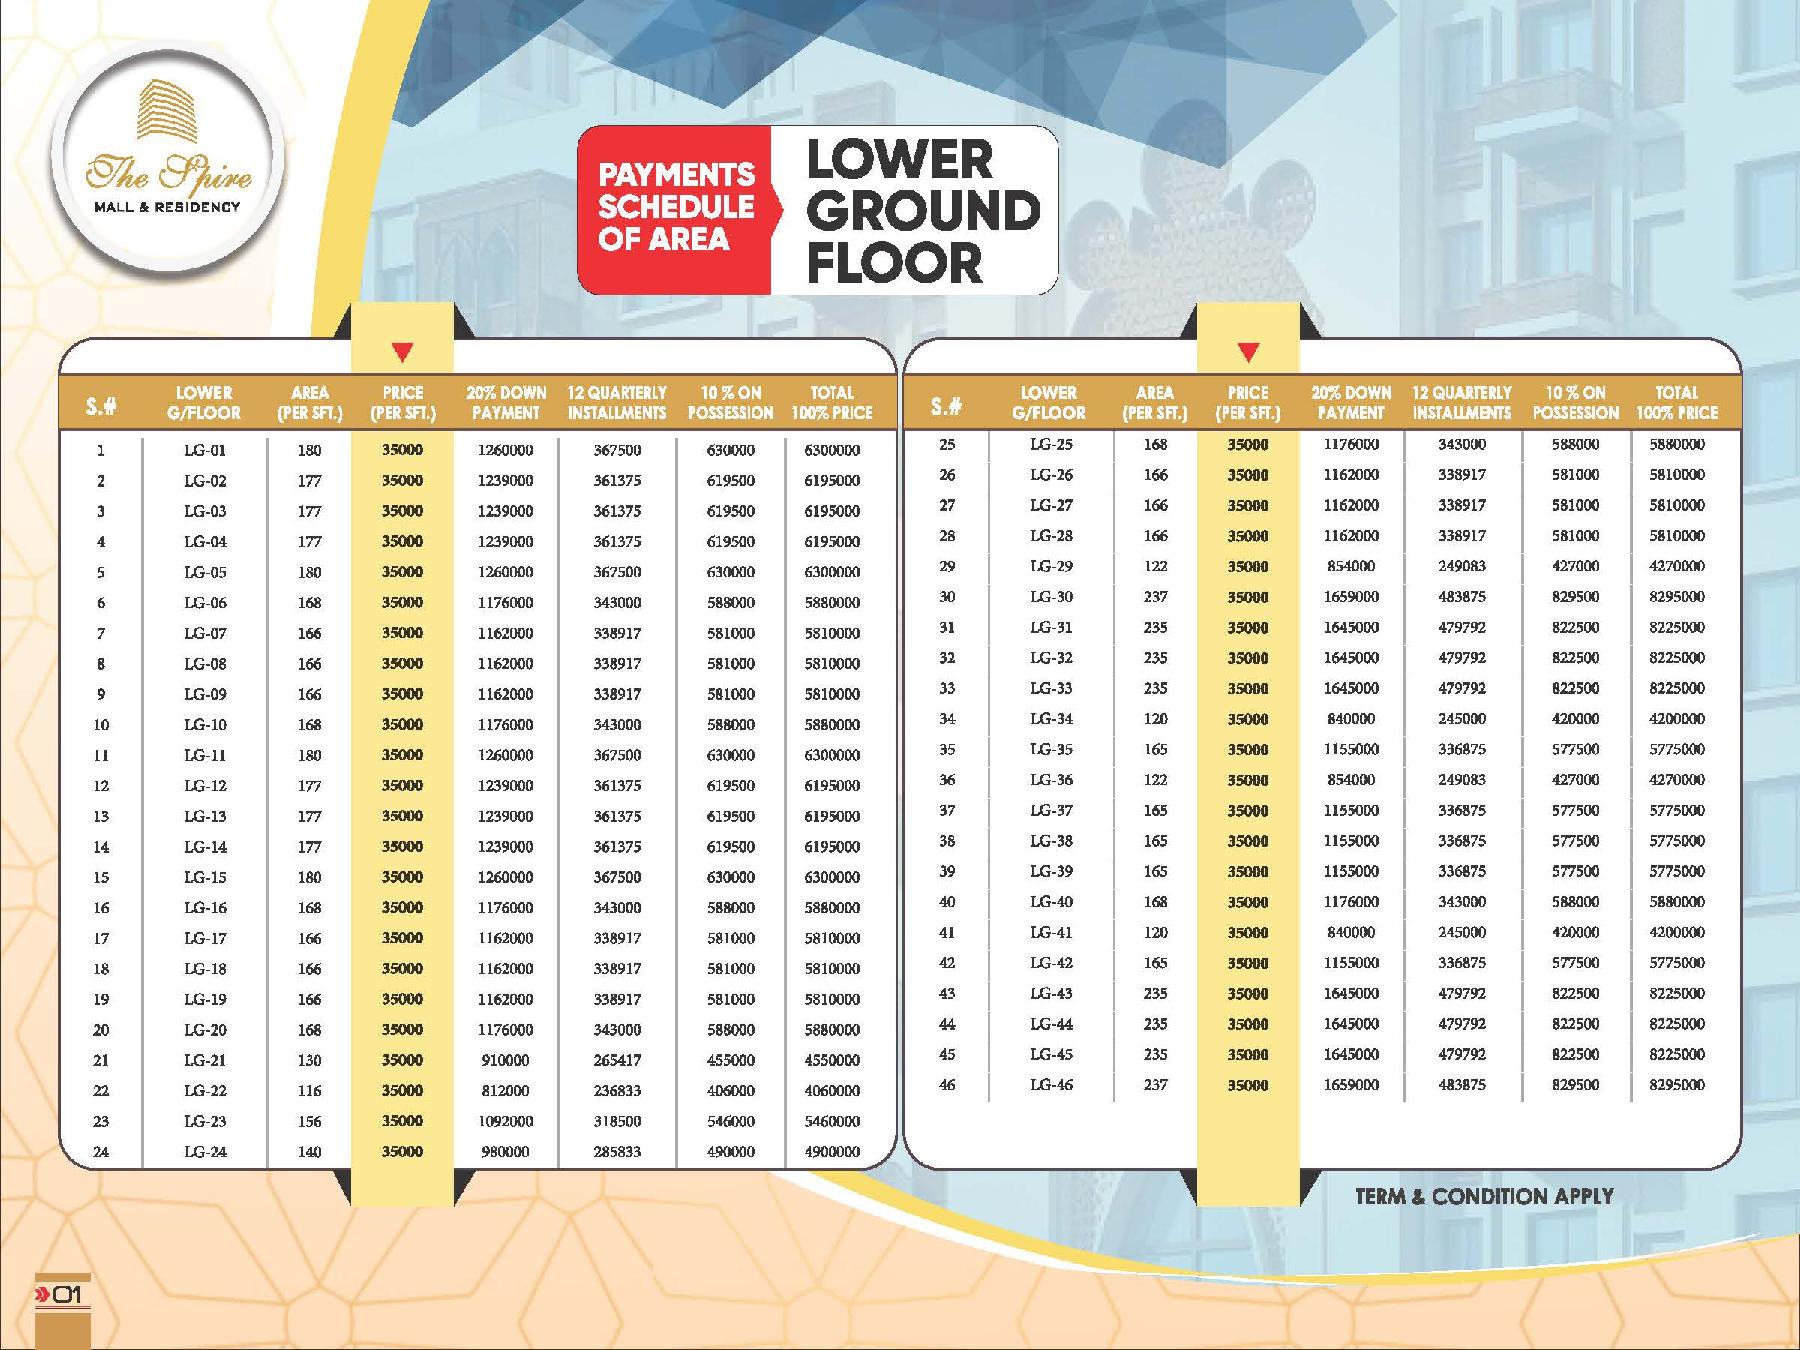 The Spire Mall Lower Ground Floor Shops Payment Plan